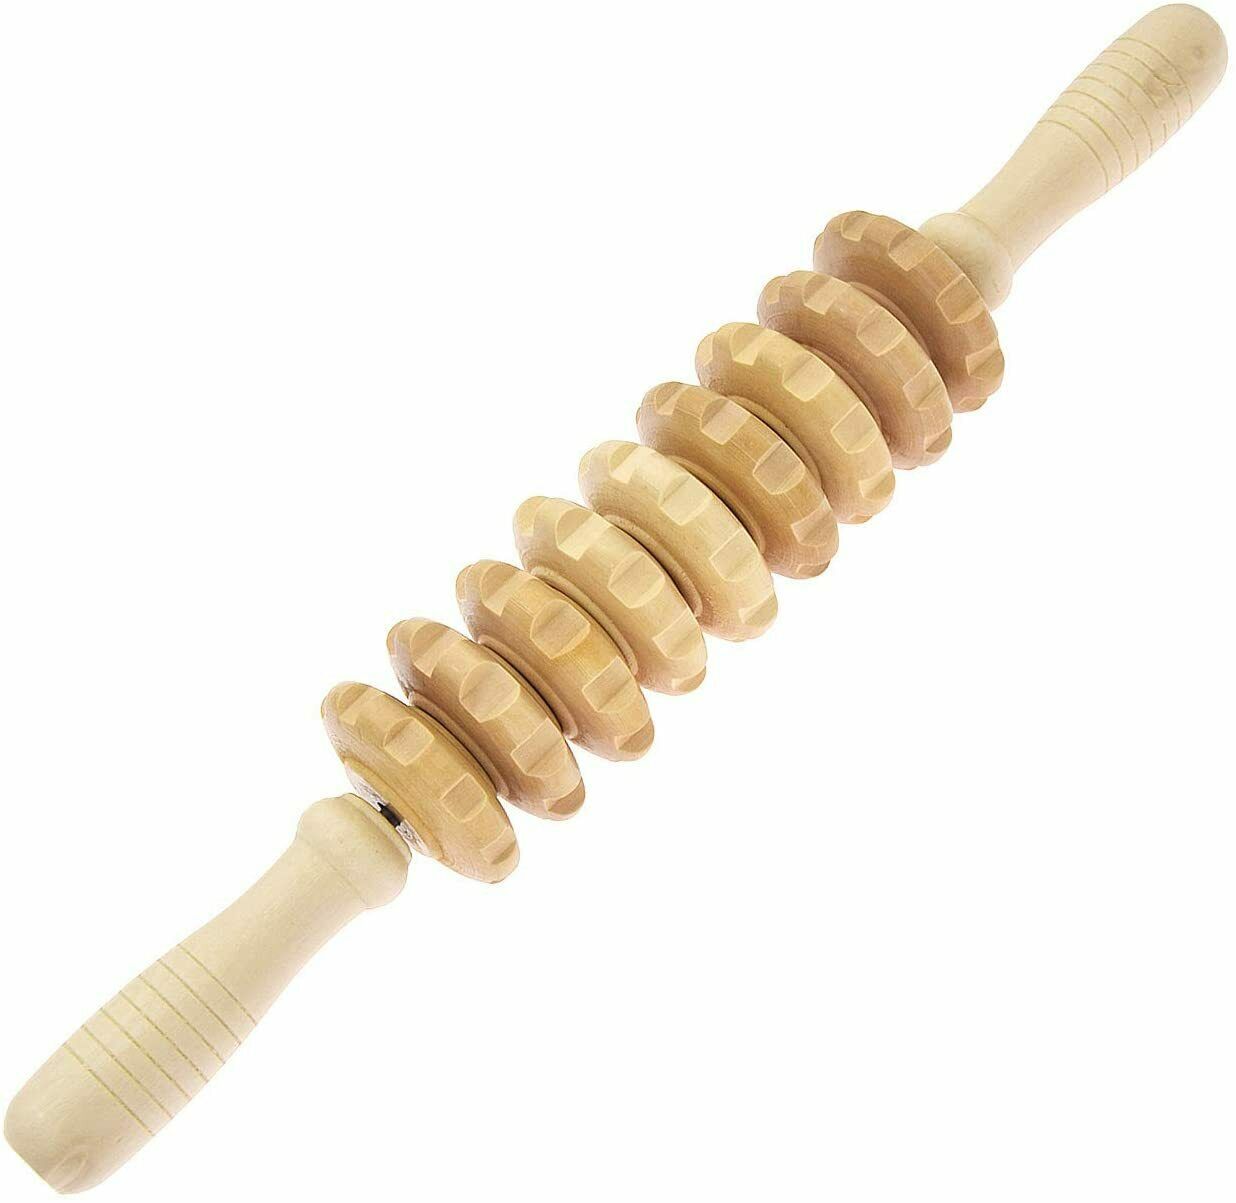 Wooden Fascia Massage Roller Trigger Points for Release Sore Muscle